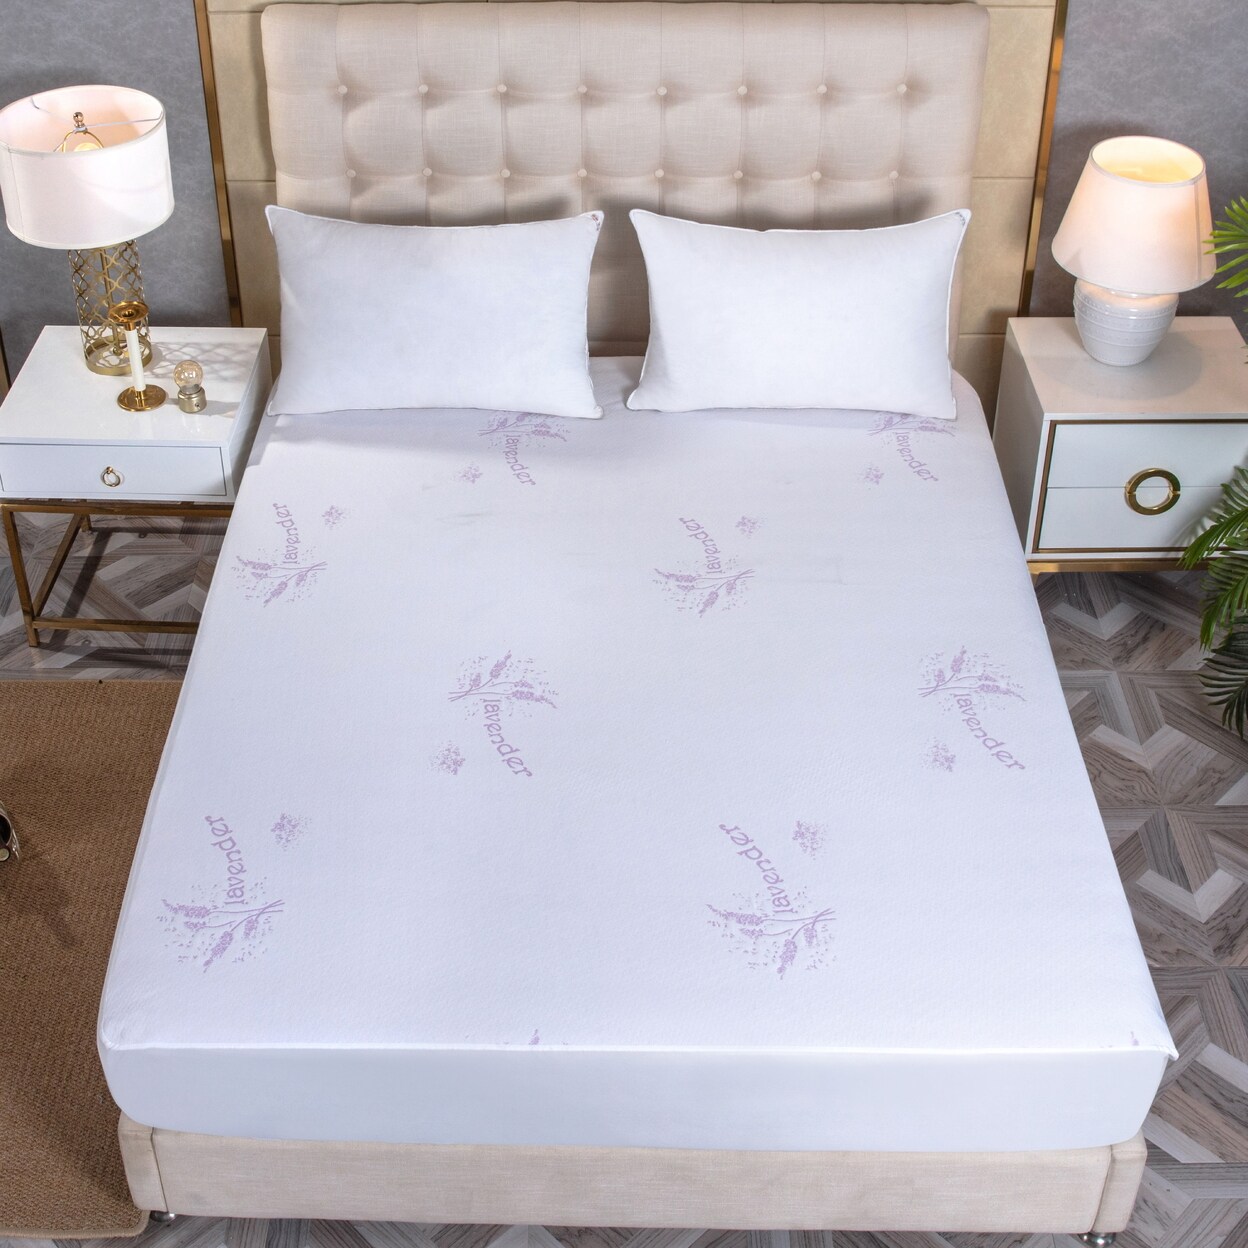 Bibb Home   Lavender Infused Scented Hypoallergenic Mattress Pad